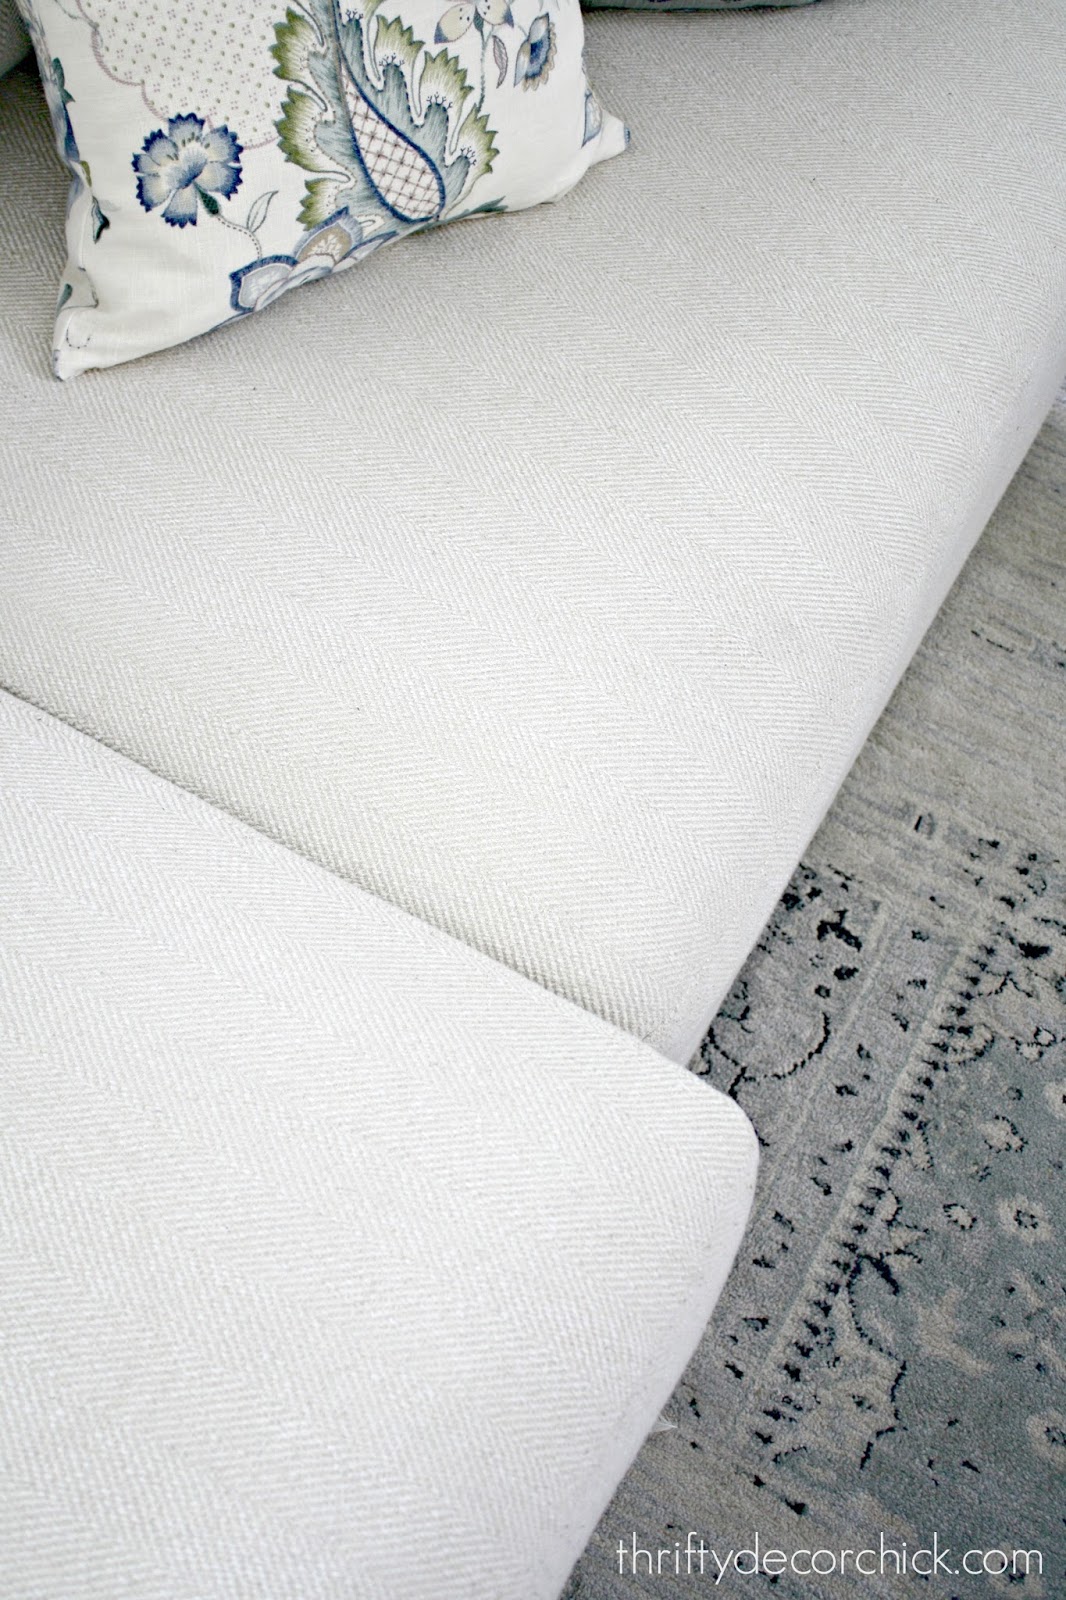 How to add velcro to a couch cushion - Quora